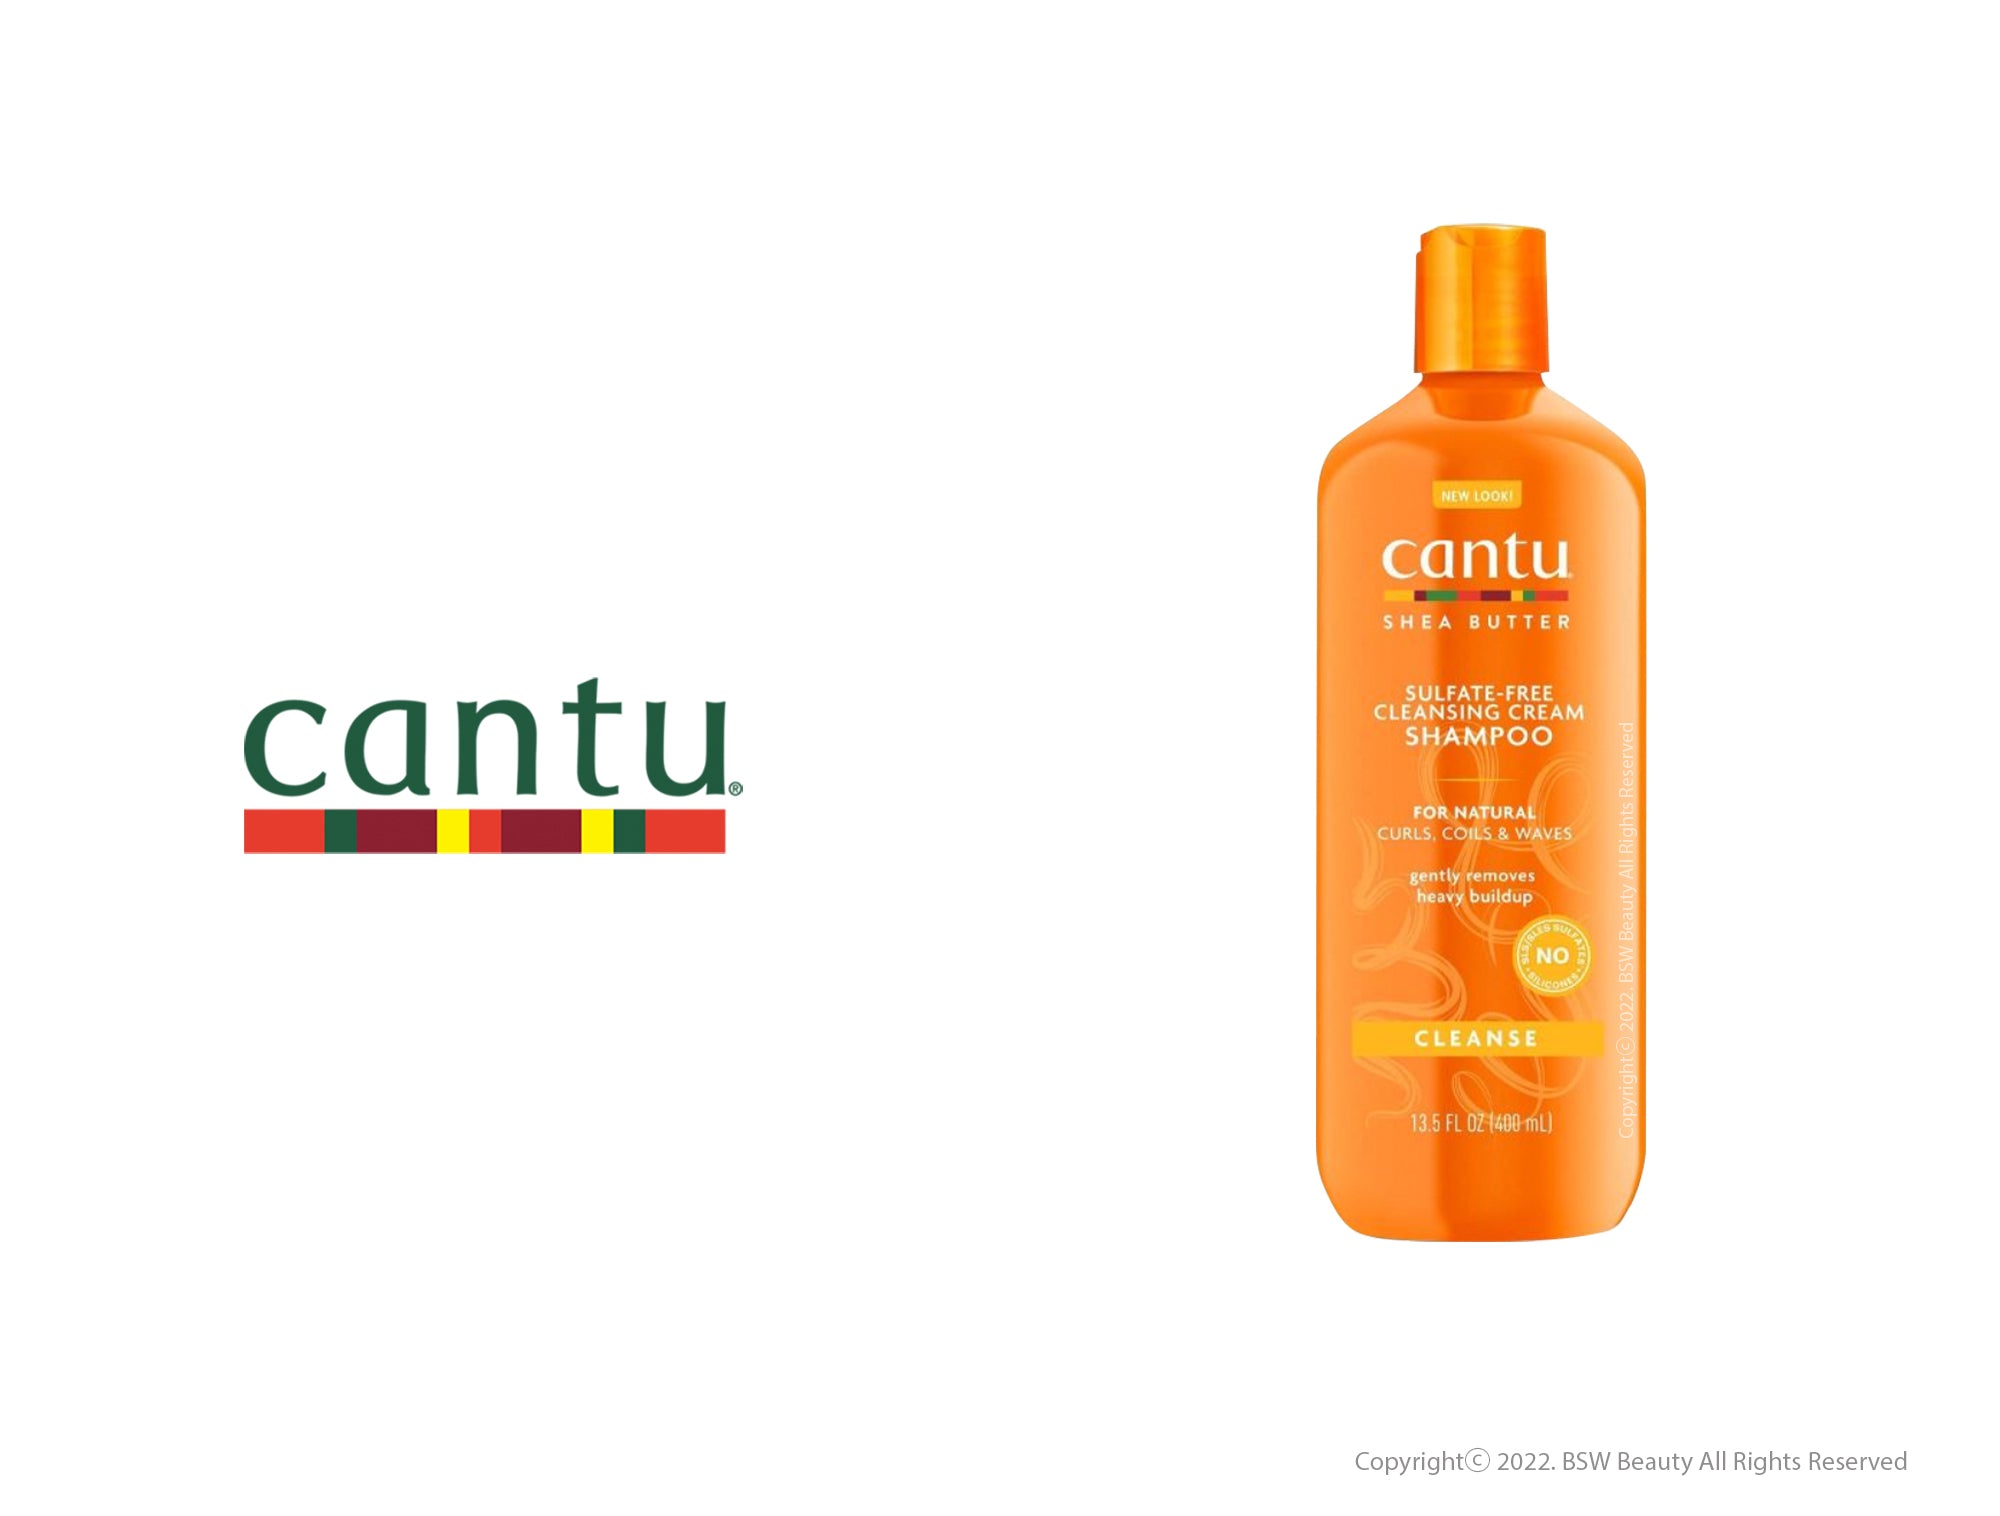 CANTU FOR NATURAL HAIR SULFATE-FREE CLEANSING CREAM SHAMPOO 13.5oz